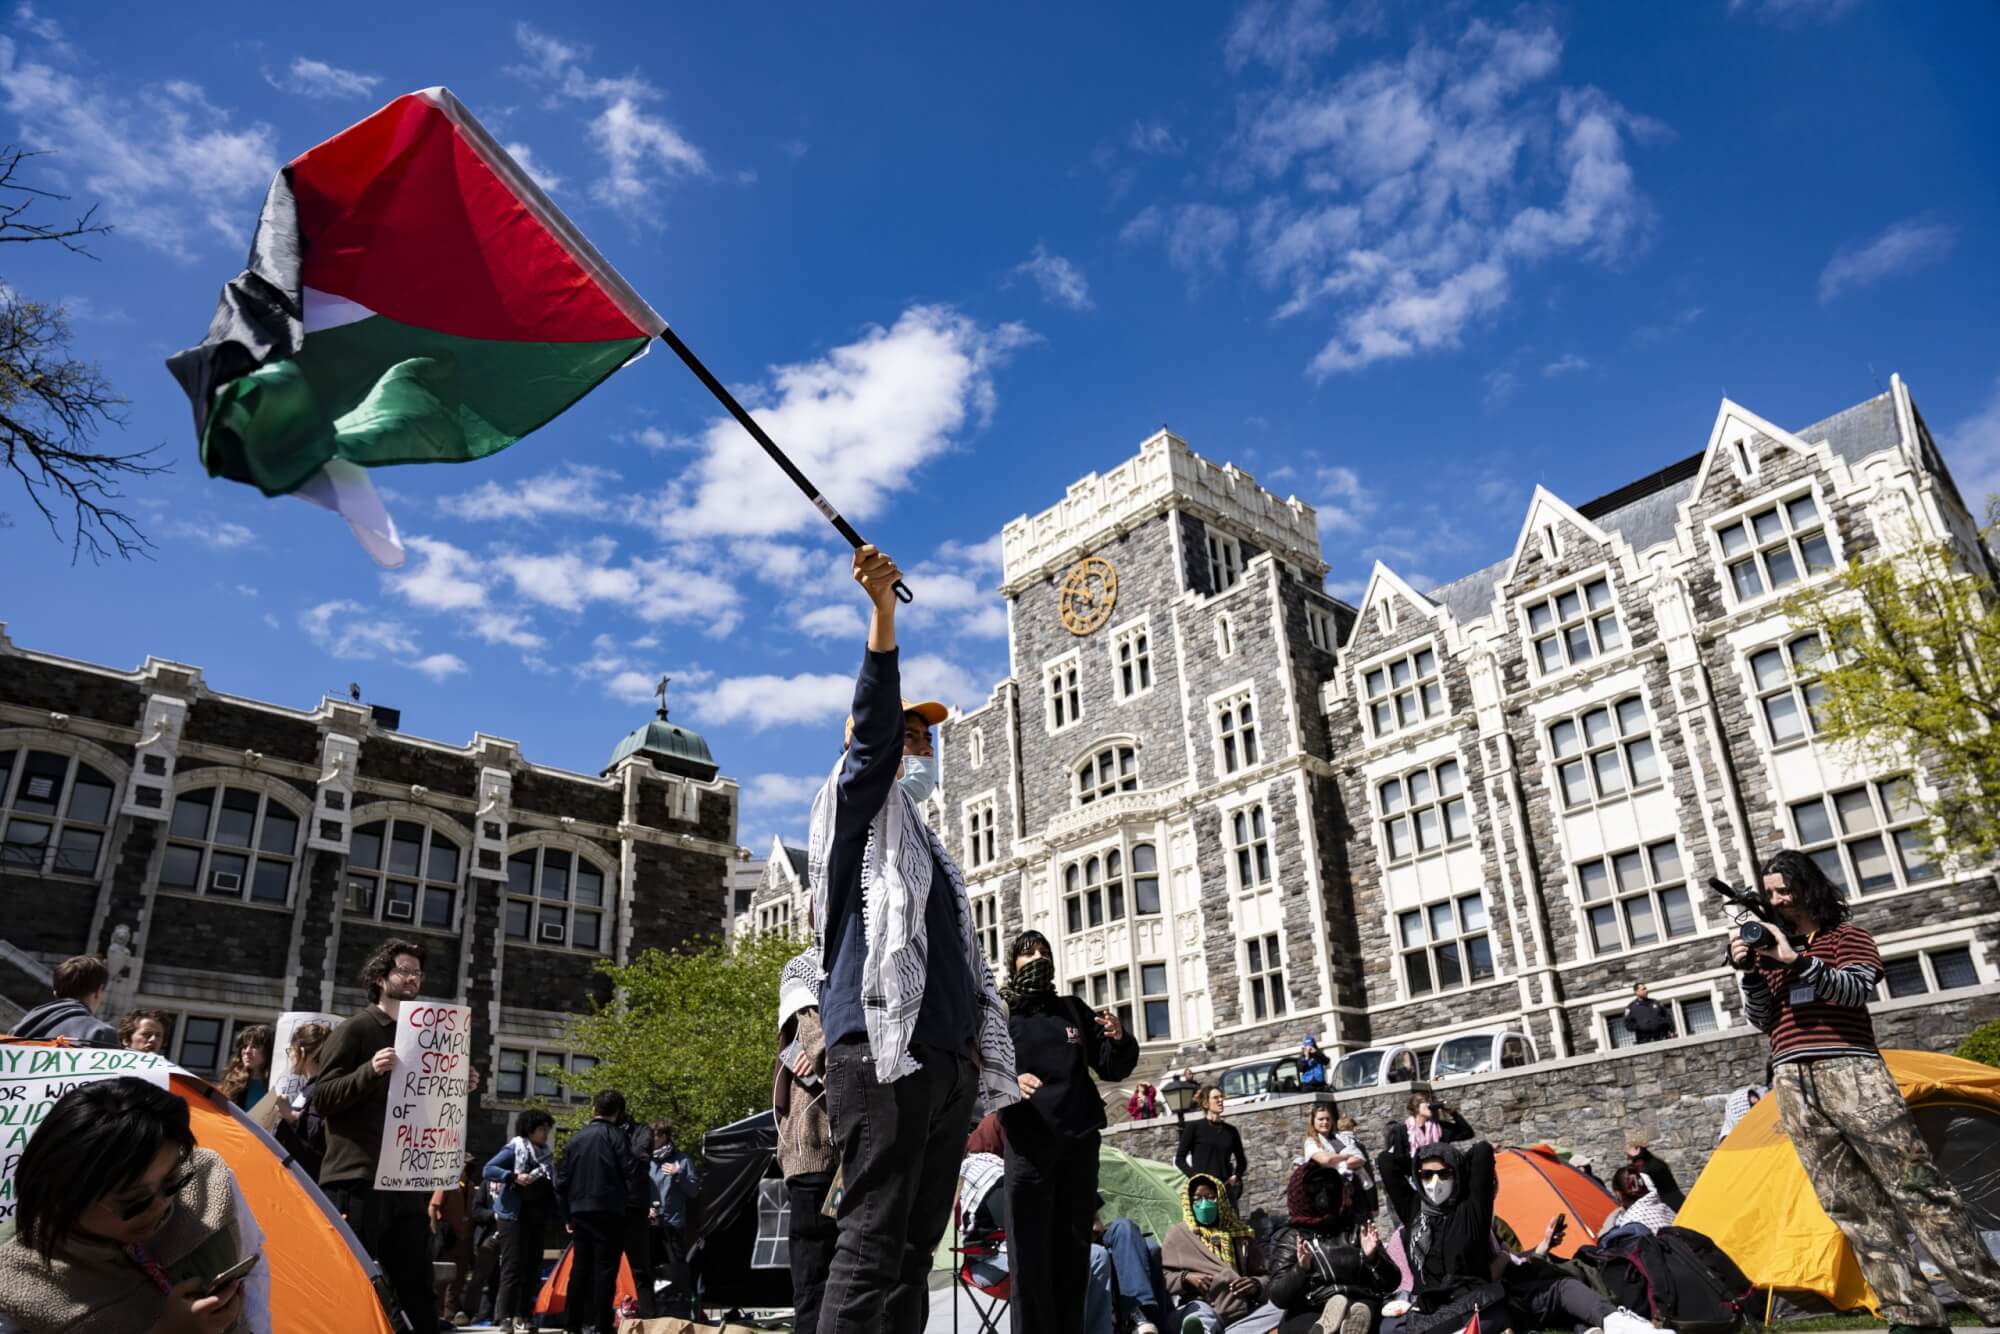 CUNY encampment felony charges could set a dangerous precedent for Palestine organizing